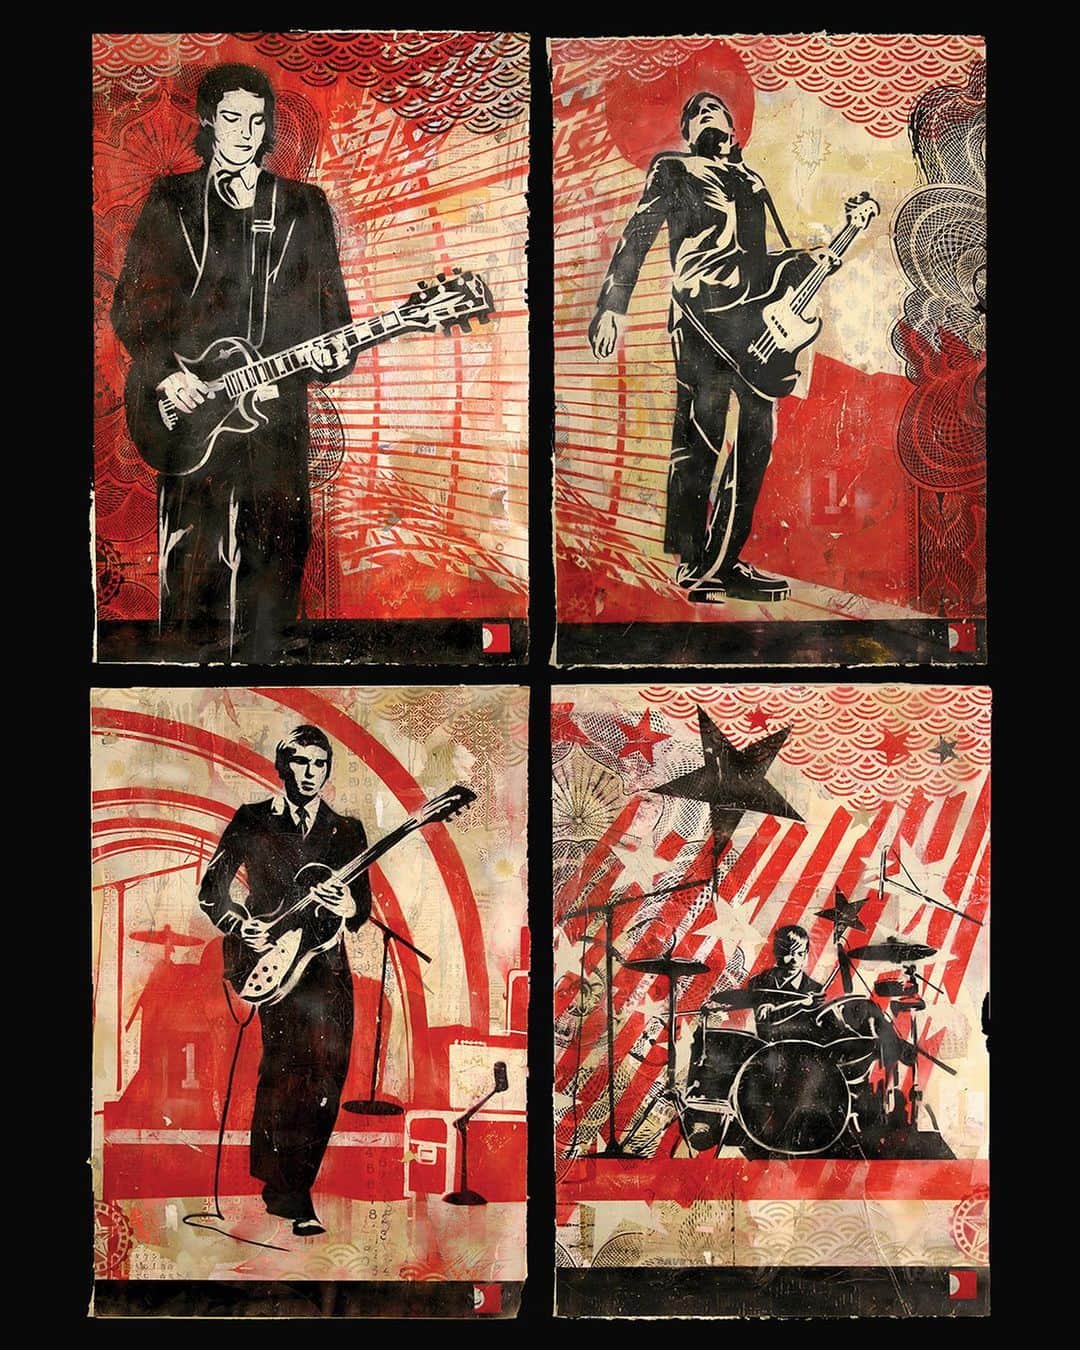 Shepard Faireyのインスタグラム：「Here's a throwback: artwork I made of @interpol in 2004. They are one of my favorite bands to come out in the early 2000s, and I approached Paul Banks, the singer, after their Coachella show in 2003 and told him I was a big fan and offered to do some artwork for them. We became friends, and eventually, he called me and said that Interpol was releasing a new record, and to promote the release, they didn't just want to throw a party; they wanted to have art spaces, and they wanted me to create artwork and curate the spaces. I illustrated some photos the band provided, made mixed-media art pieces, and finally deconstructed everything by showing the reference photos and the process along with the new pieces. It was a great project for their Antics album. –Shepard」